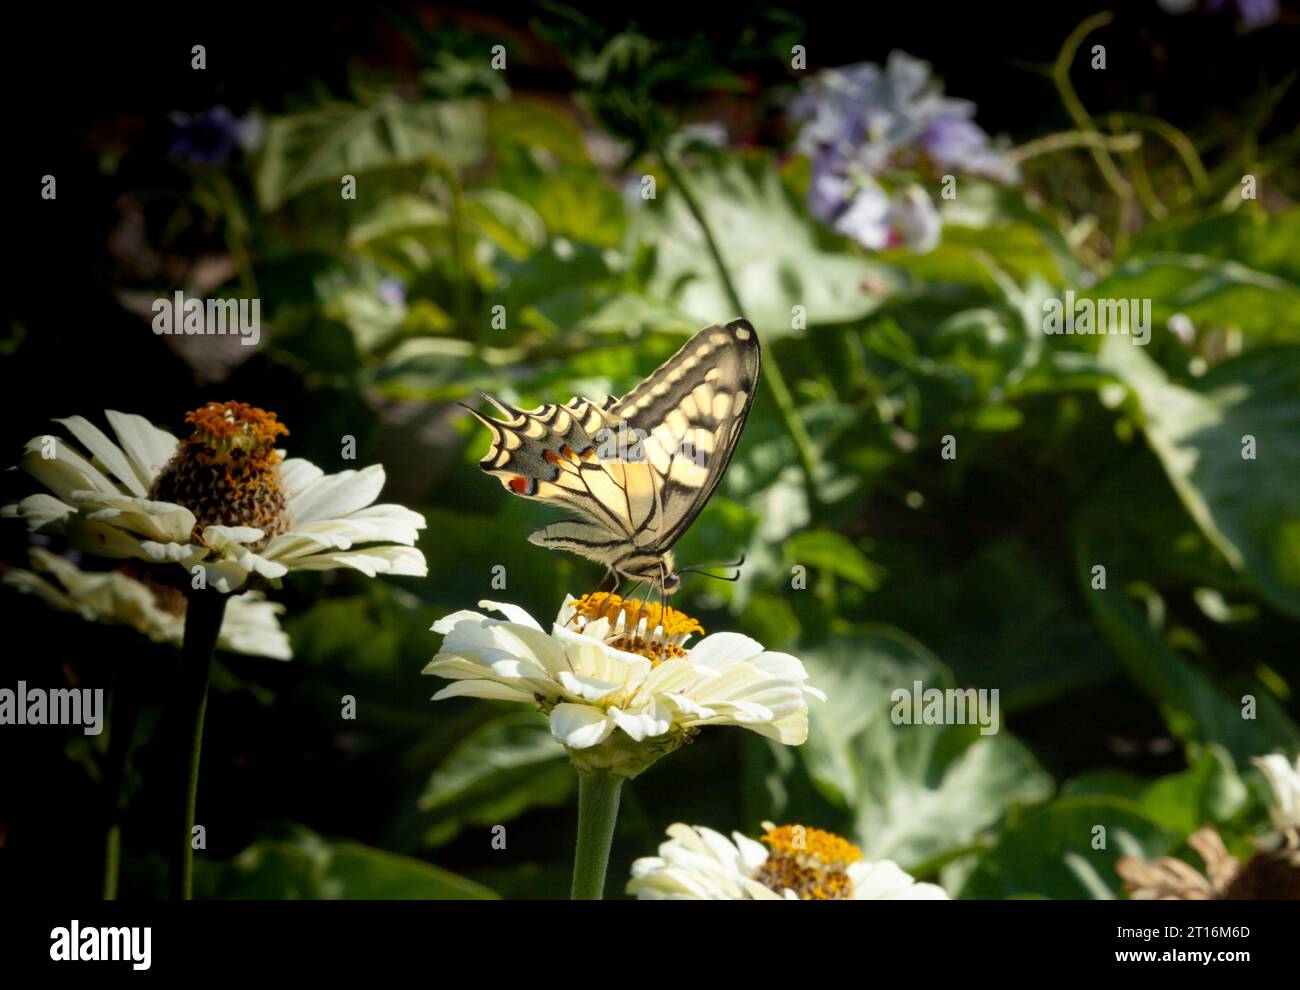 Close-up of Swallowtail butterfly or called Papilio machaon syriacus. A yellow and black butterfly lands on a white flower. Stock Photo